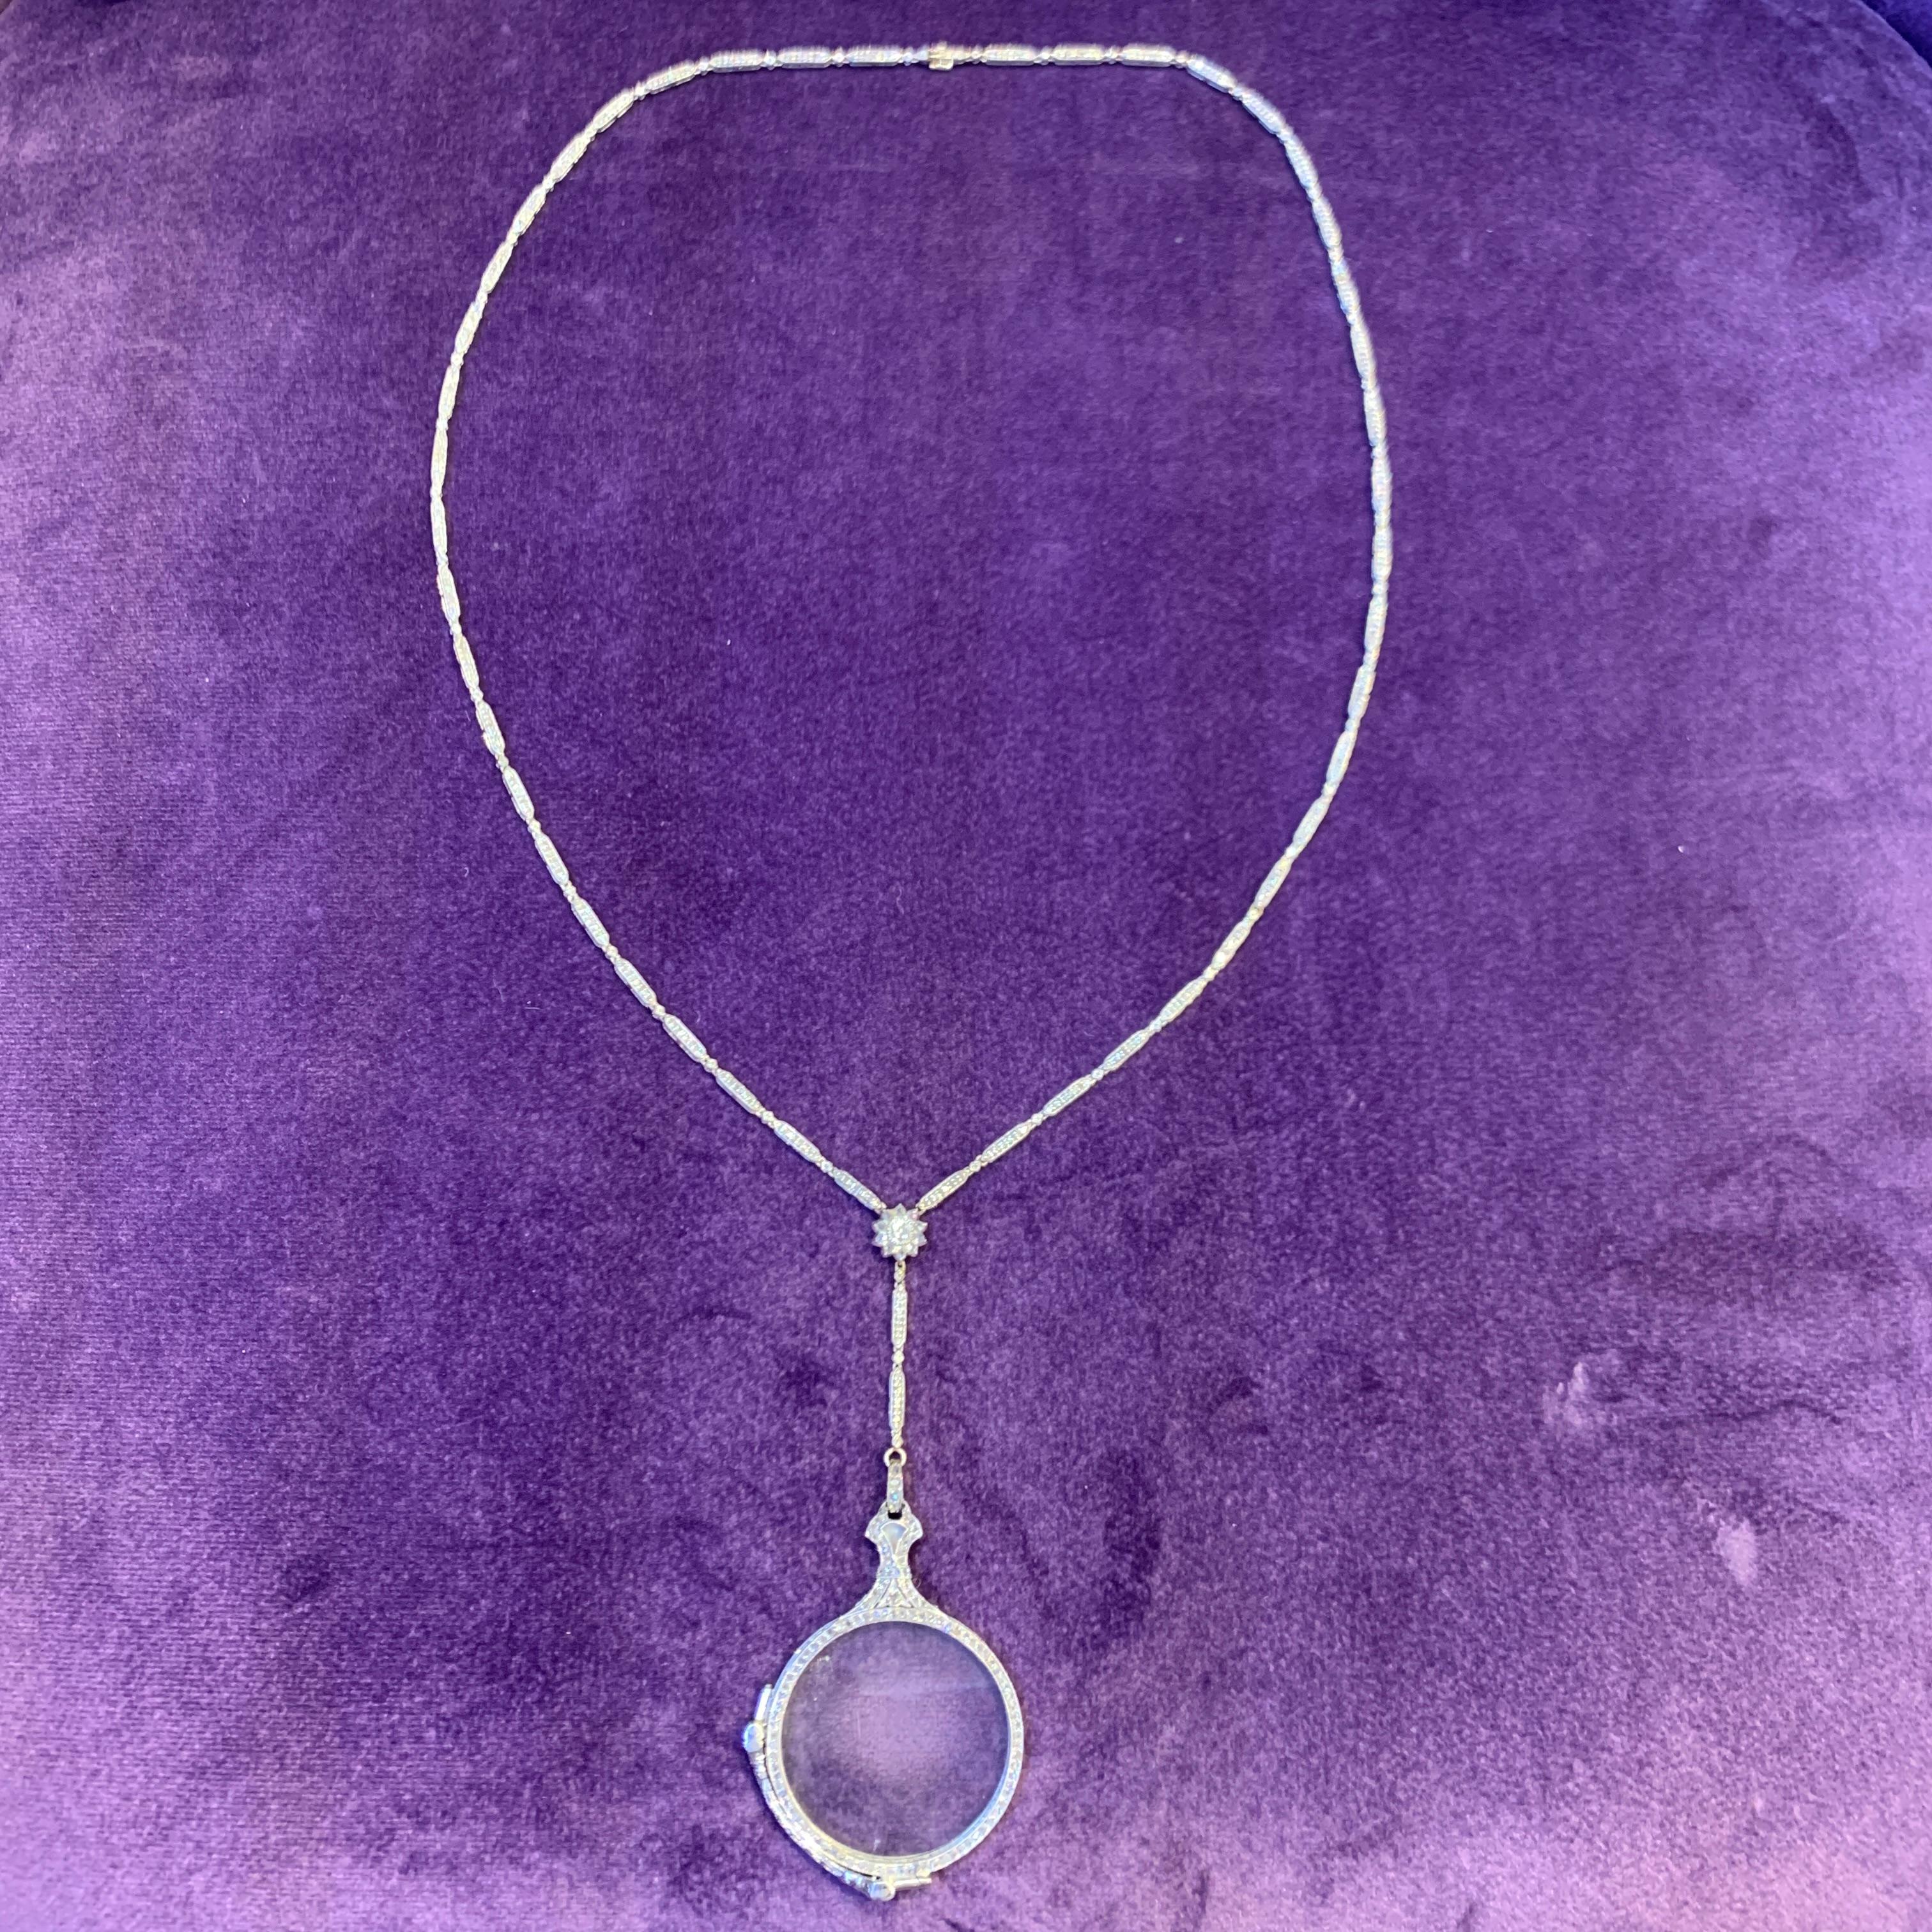 Diamond Lorgnette Necklace In Excellent Condition For Sale In New York, NY